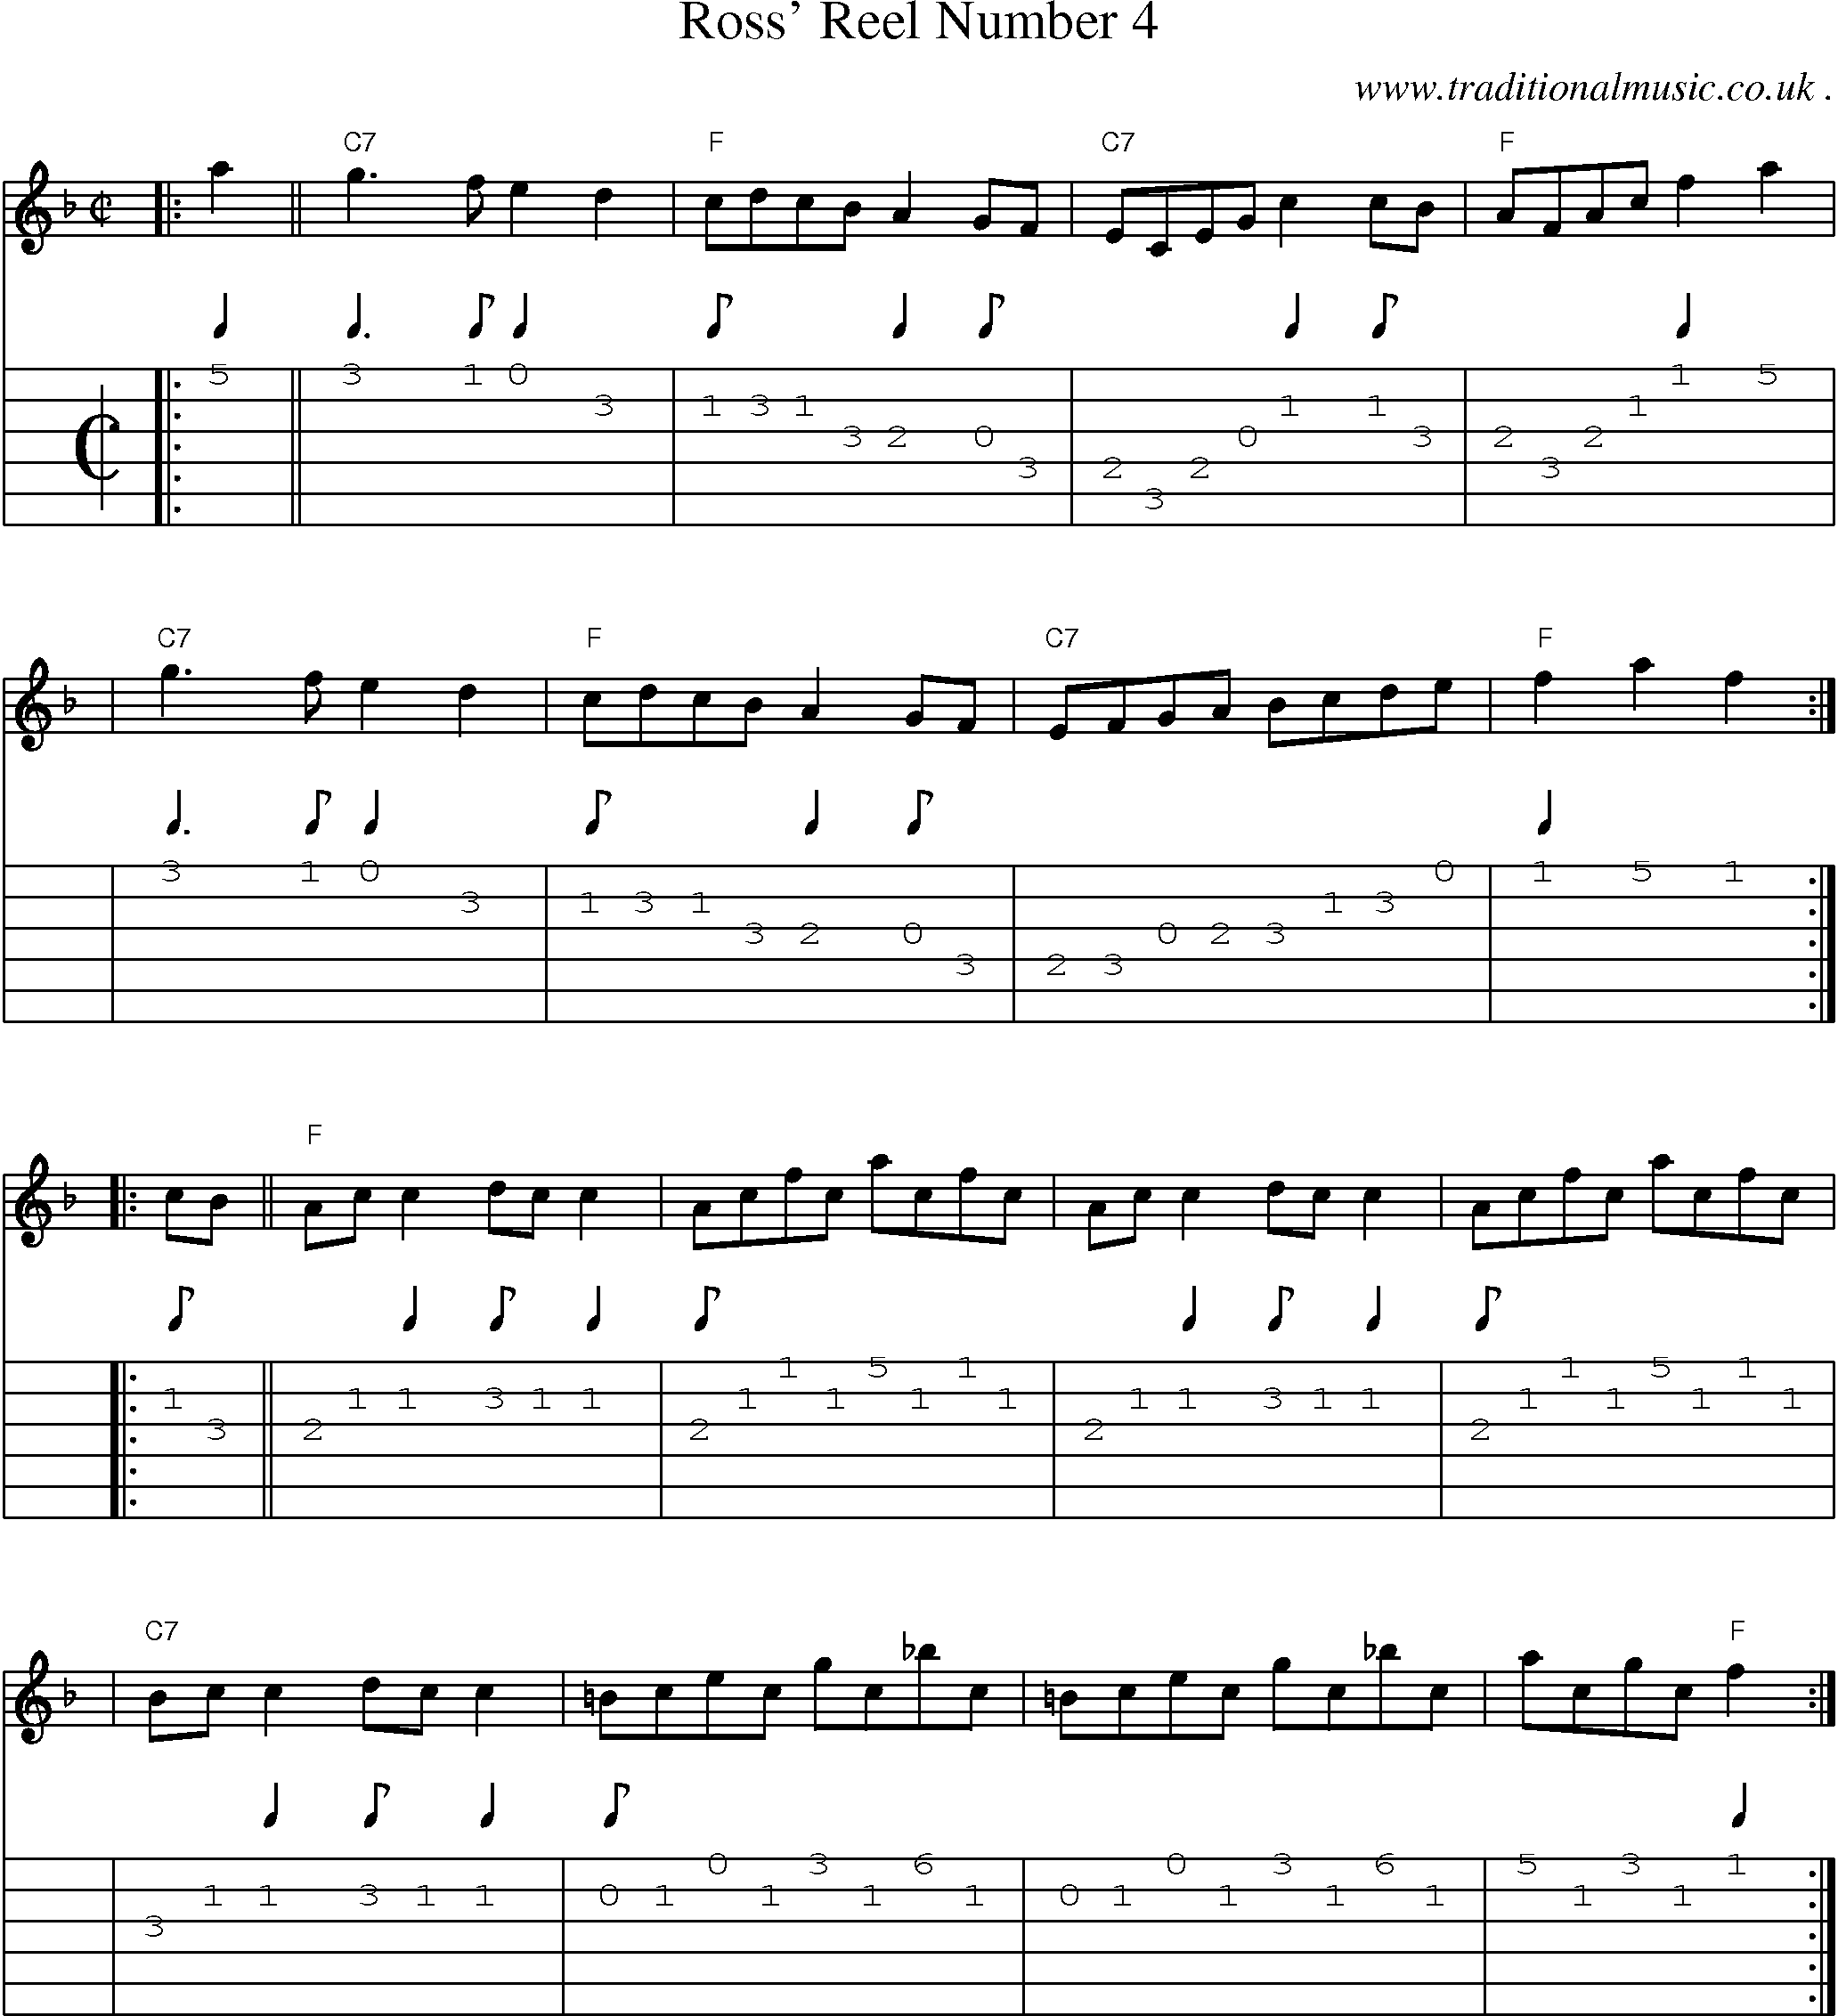 Sheet-Music and Guitar Tabs for Ross Reel Number 4